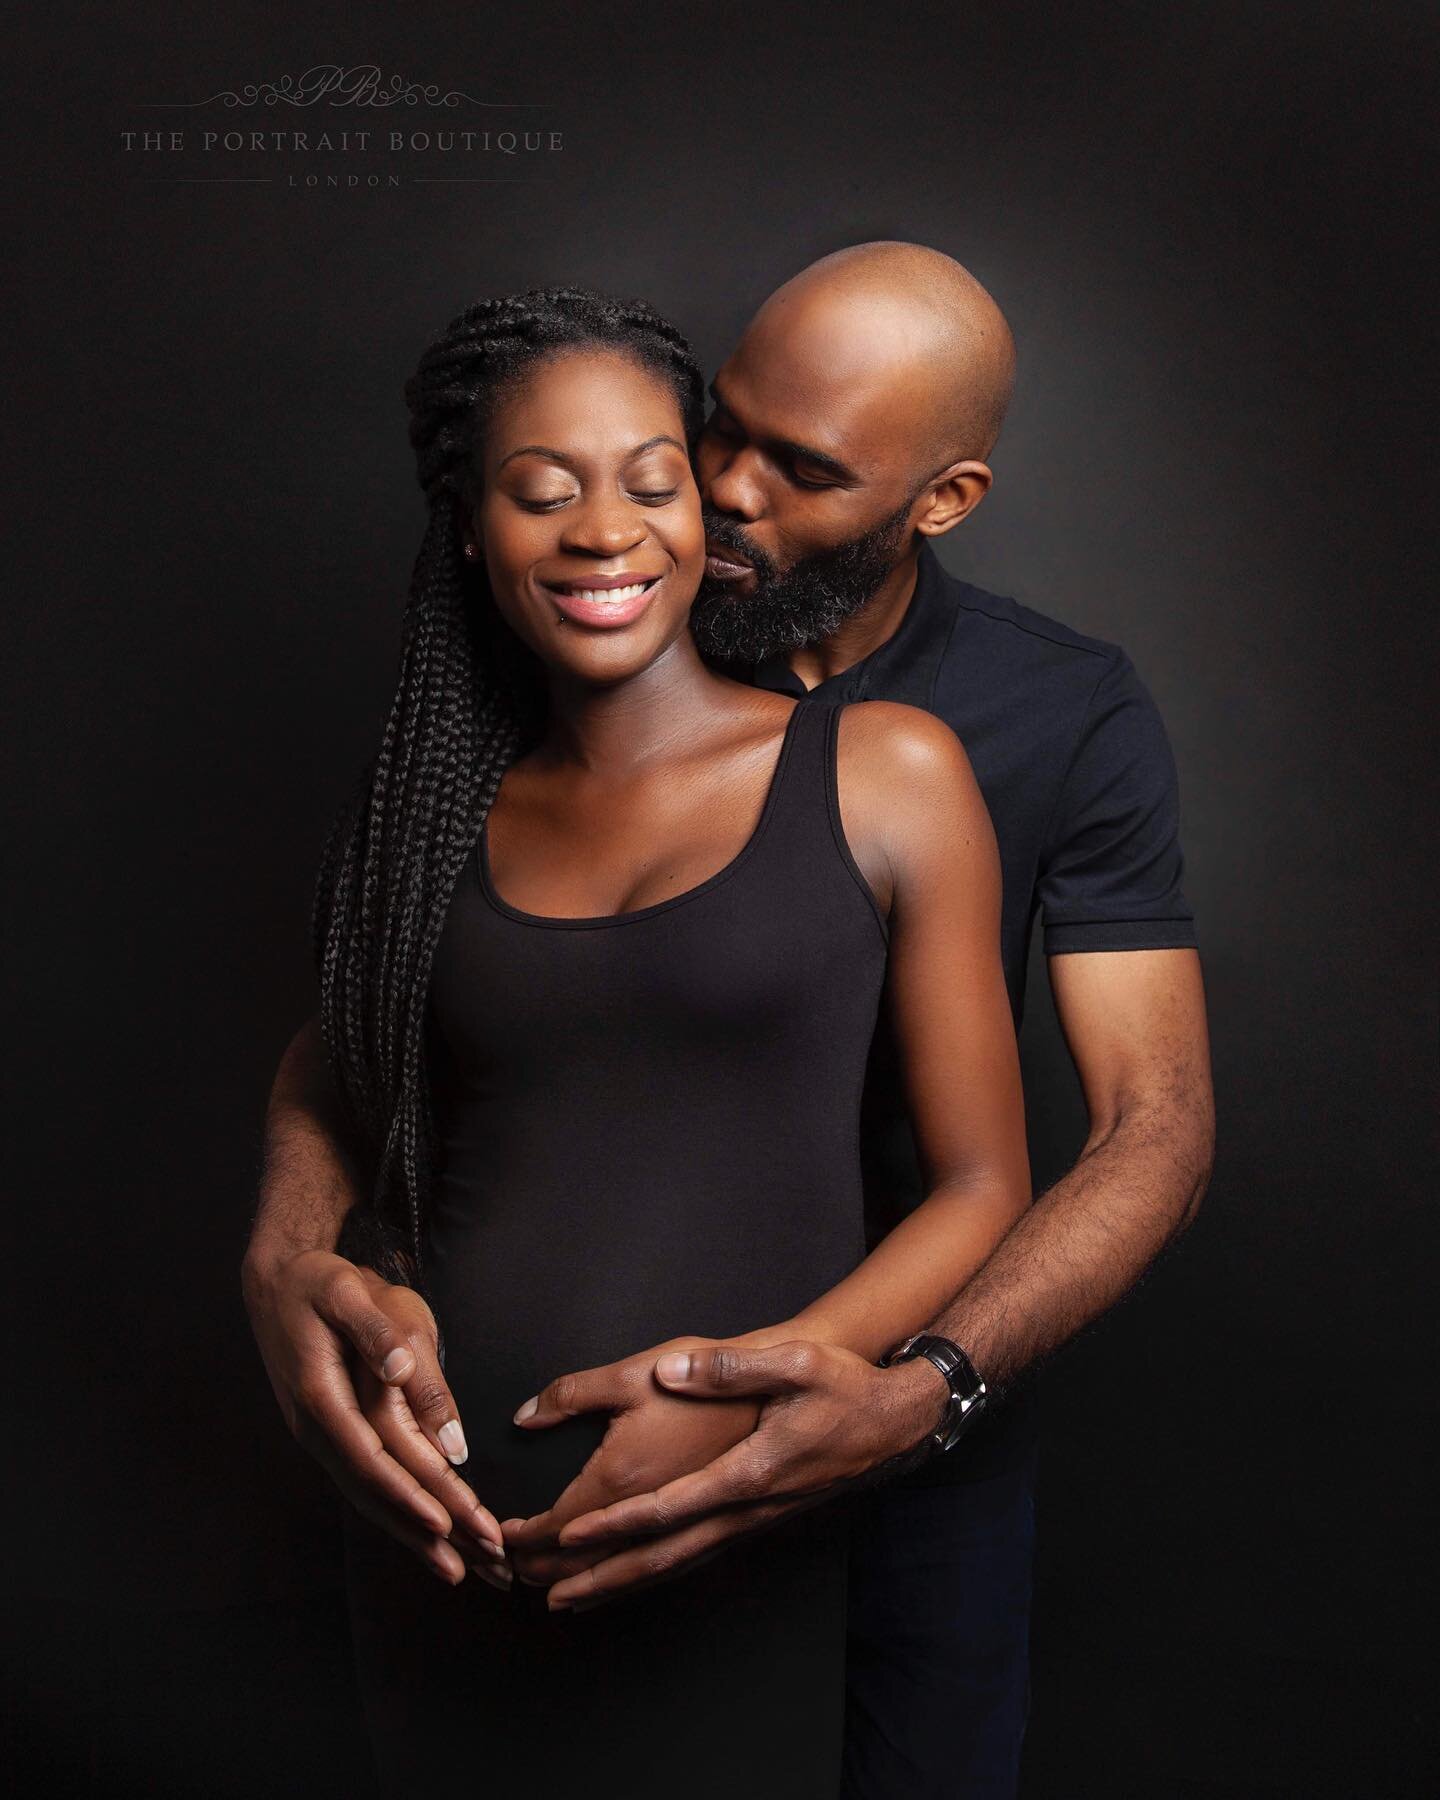 The most beautiful love story of all, captured in this maternity photo-shoot. A celebration of the miracle of life! Wishing Rita &amp; Emeric so much joy &amp; happiness in the exciting weeks and months ahead xx